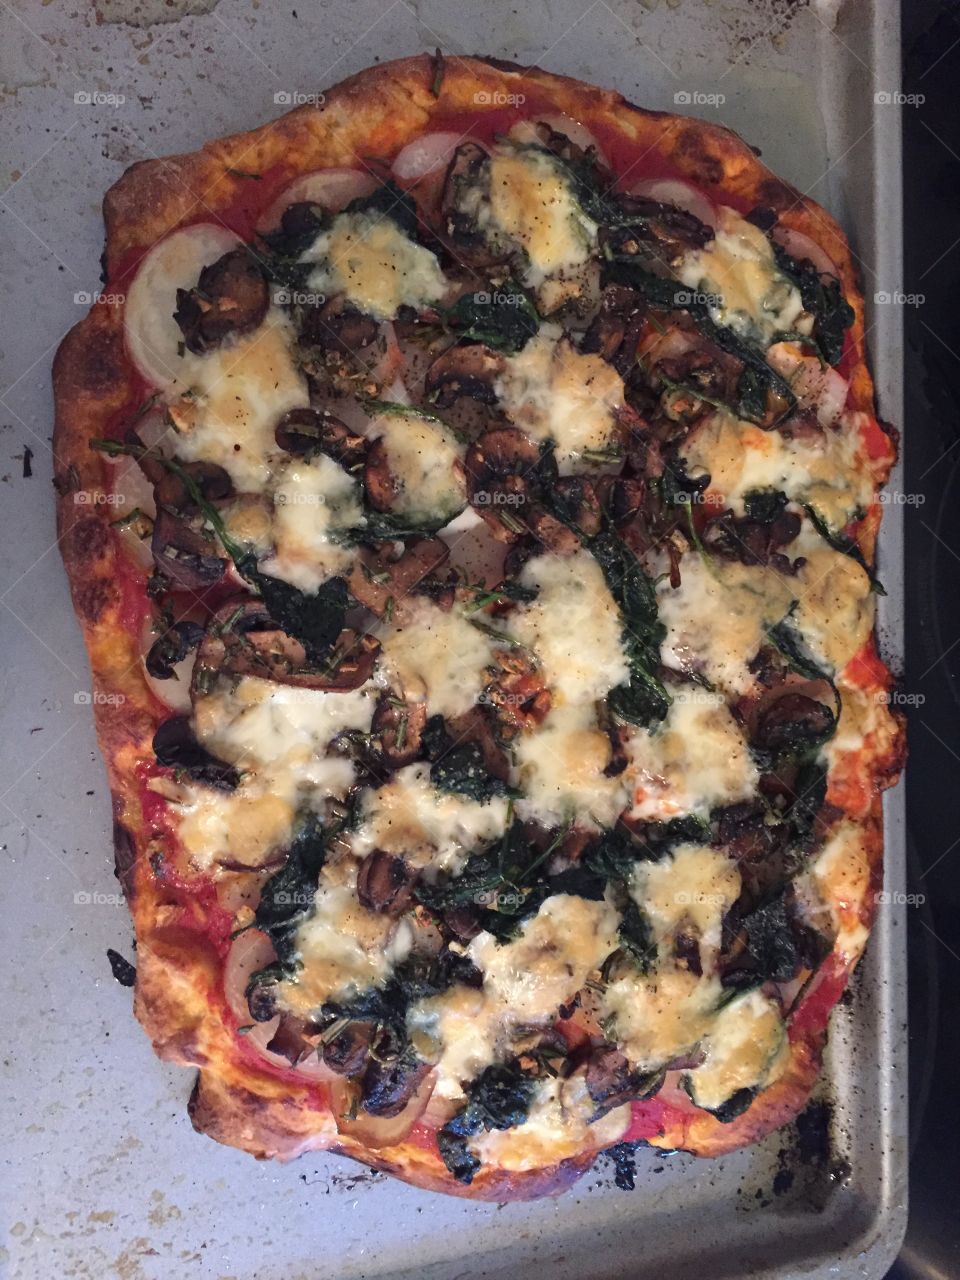 Non-traditional homemade pizza, delicious with potatoes, mushrooms, cheese, sauce, and spinach